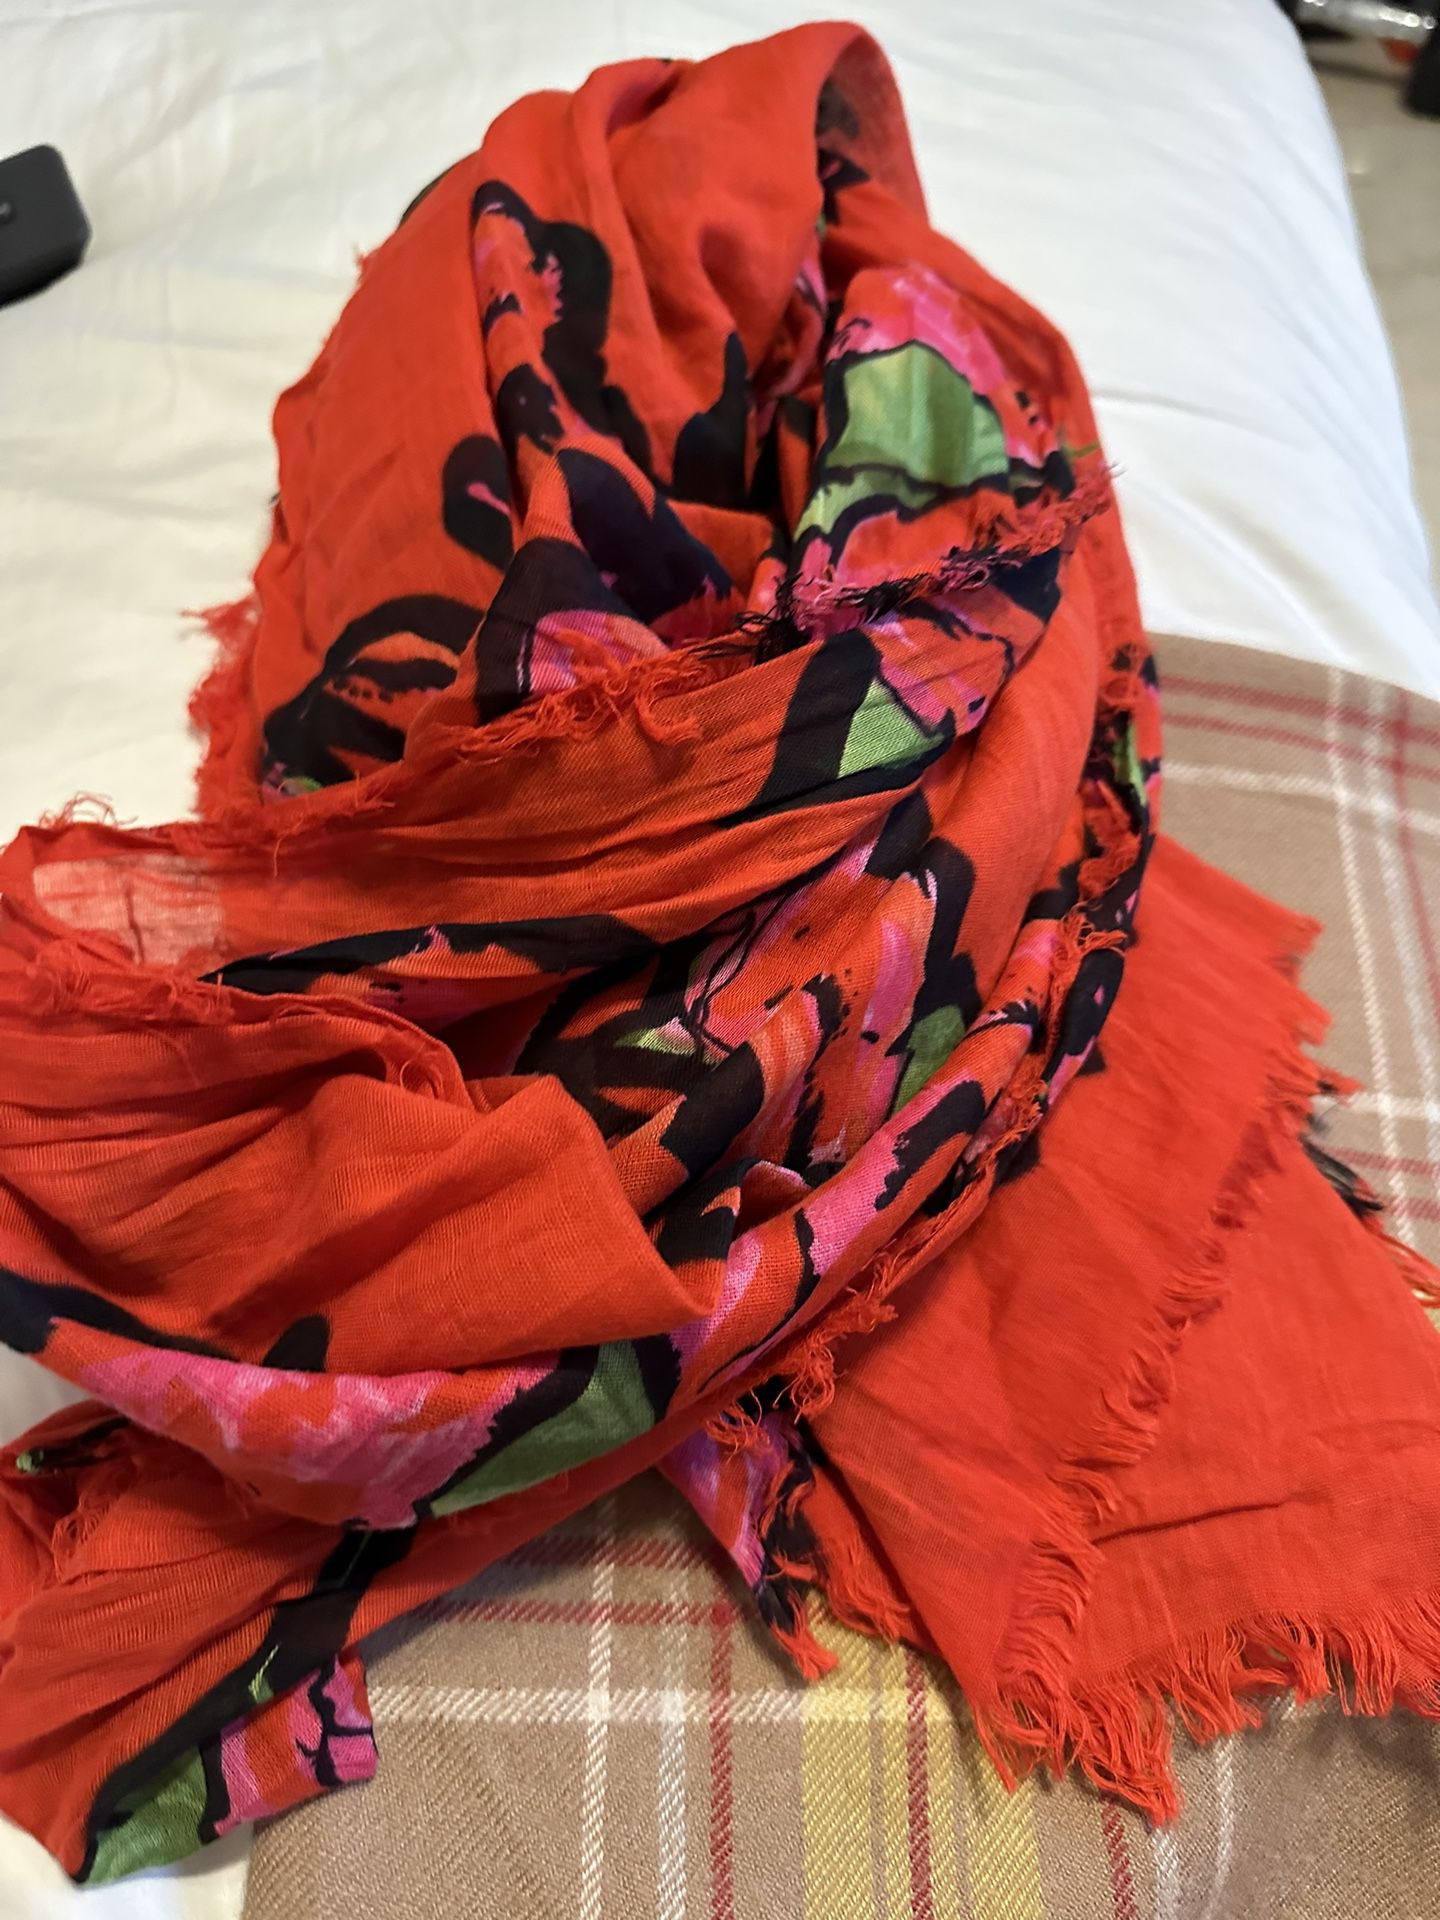 LOUIS VUITTON STEPHEN SPROUSE SCARF PINK ROSES STOLE